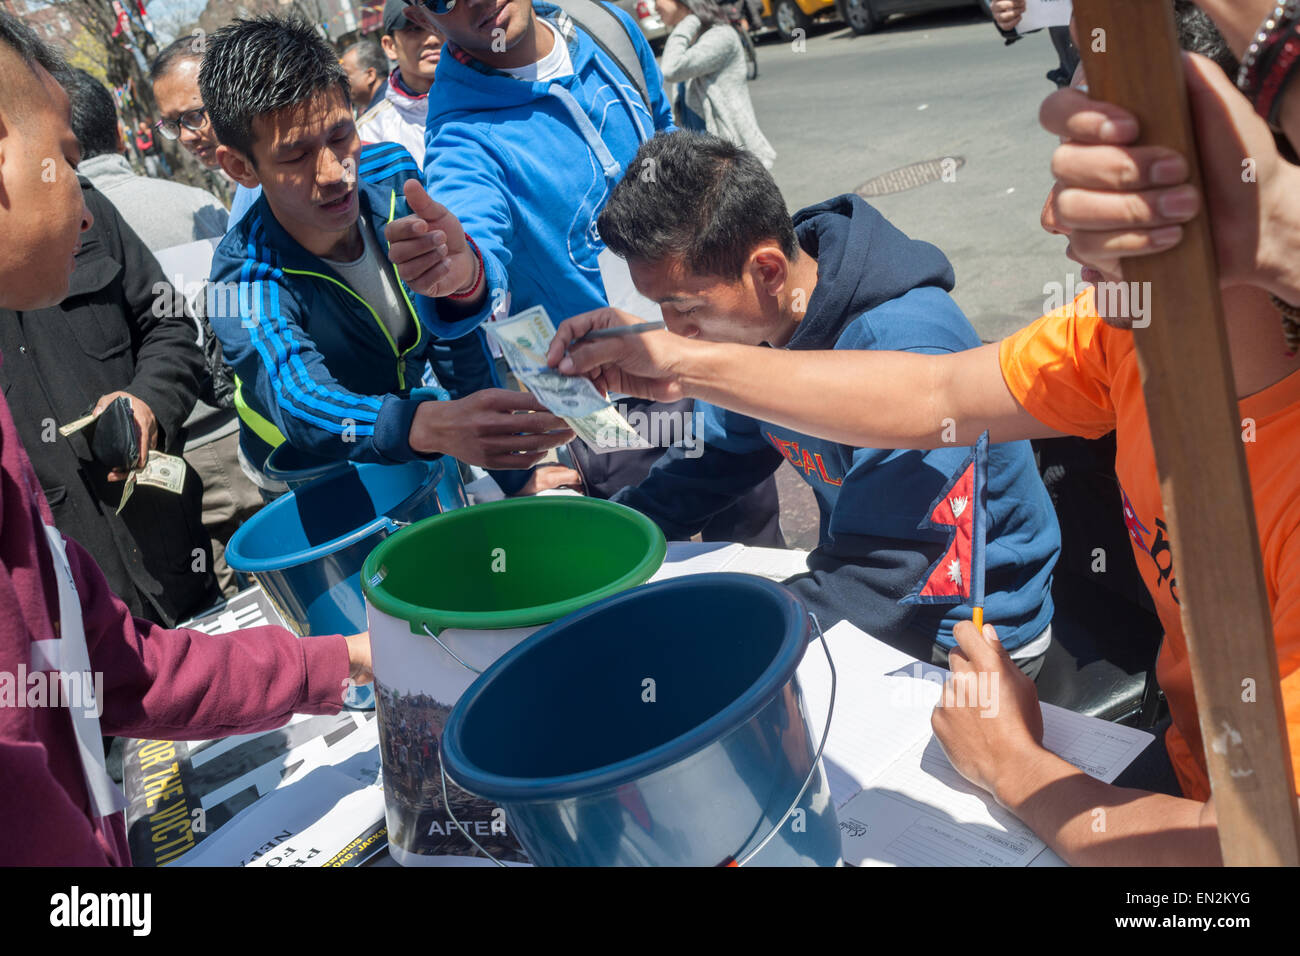 Jackson Heights, New York, USA. 26th Apr, 2015. Members of the Nepalese community in Jackson Heights in New York collect money for victims of the Nepalese earthquake, on Sunday, April 26, 2015. Jackson Heights has a sizable Nepalese community with many members worried about the whereabouts and safety of family and friends. Over 2500 people have died in the massive earthquake. Credit:  Richard Levine/Alamy Live News Stock Photo